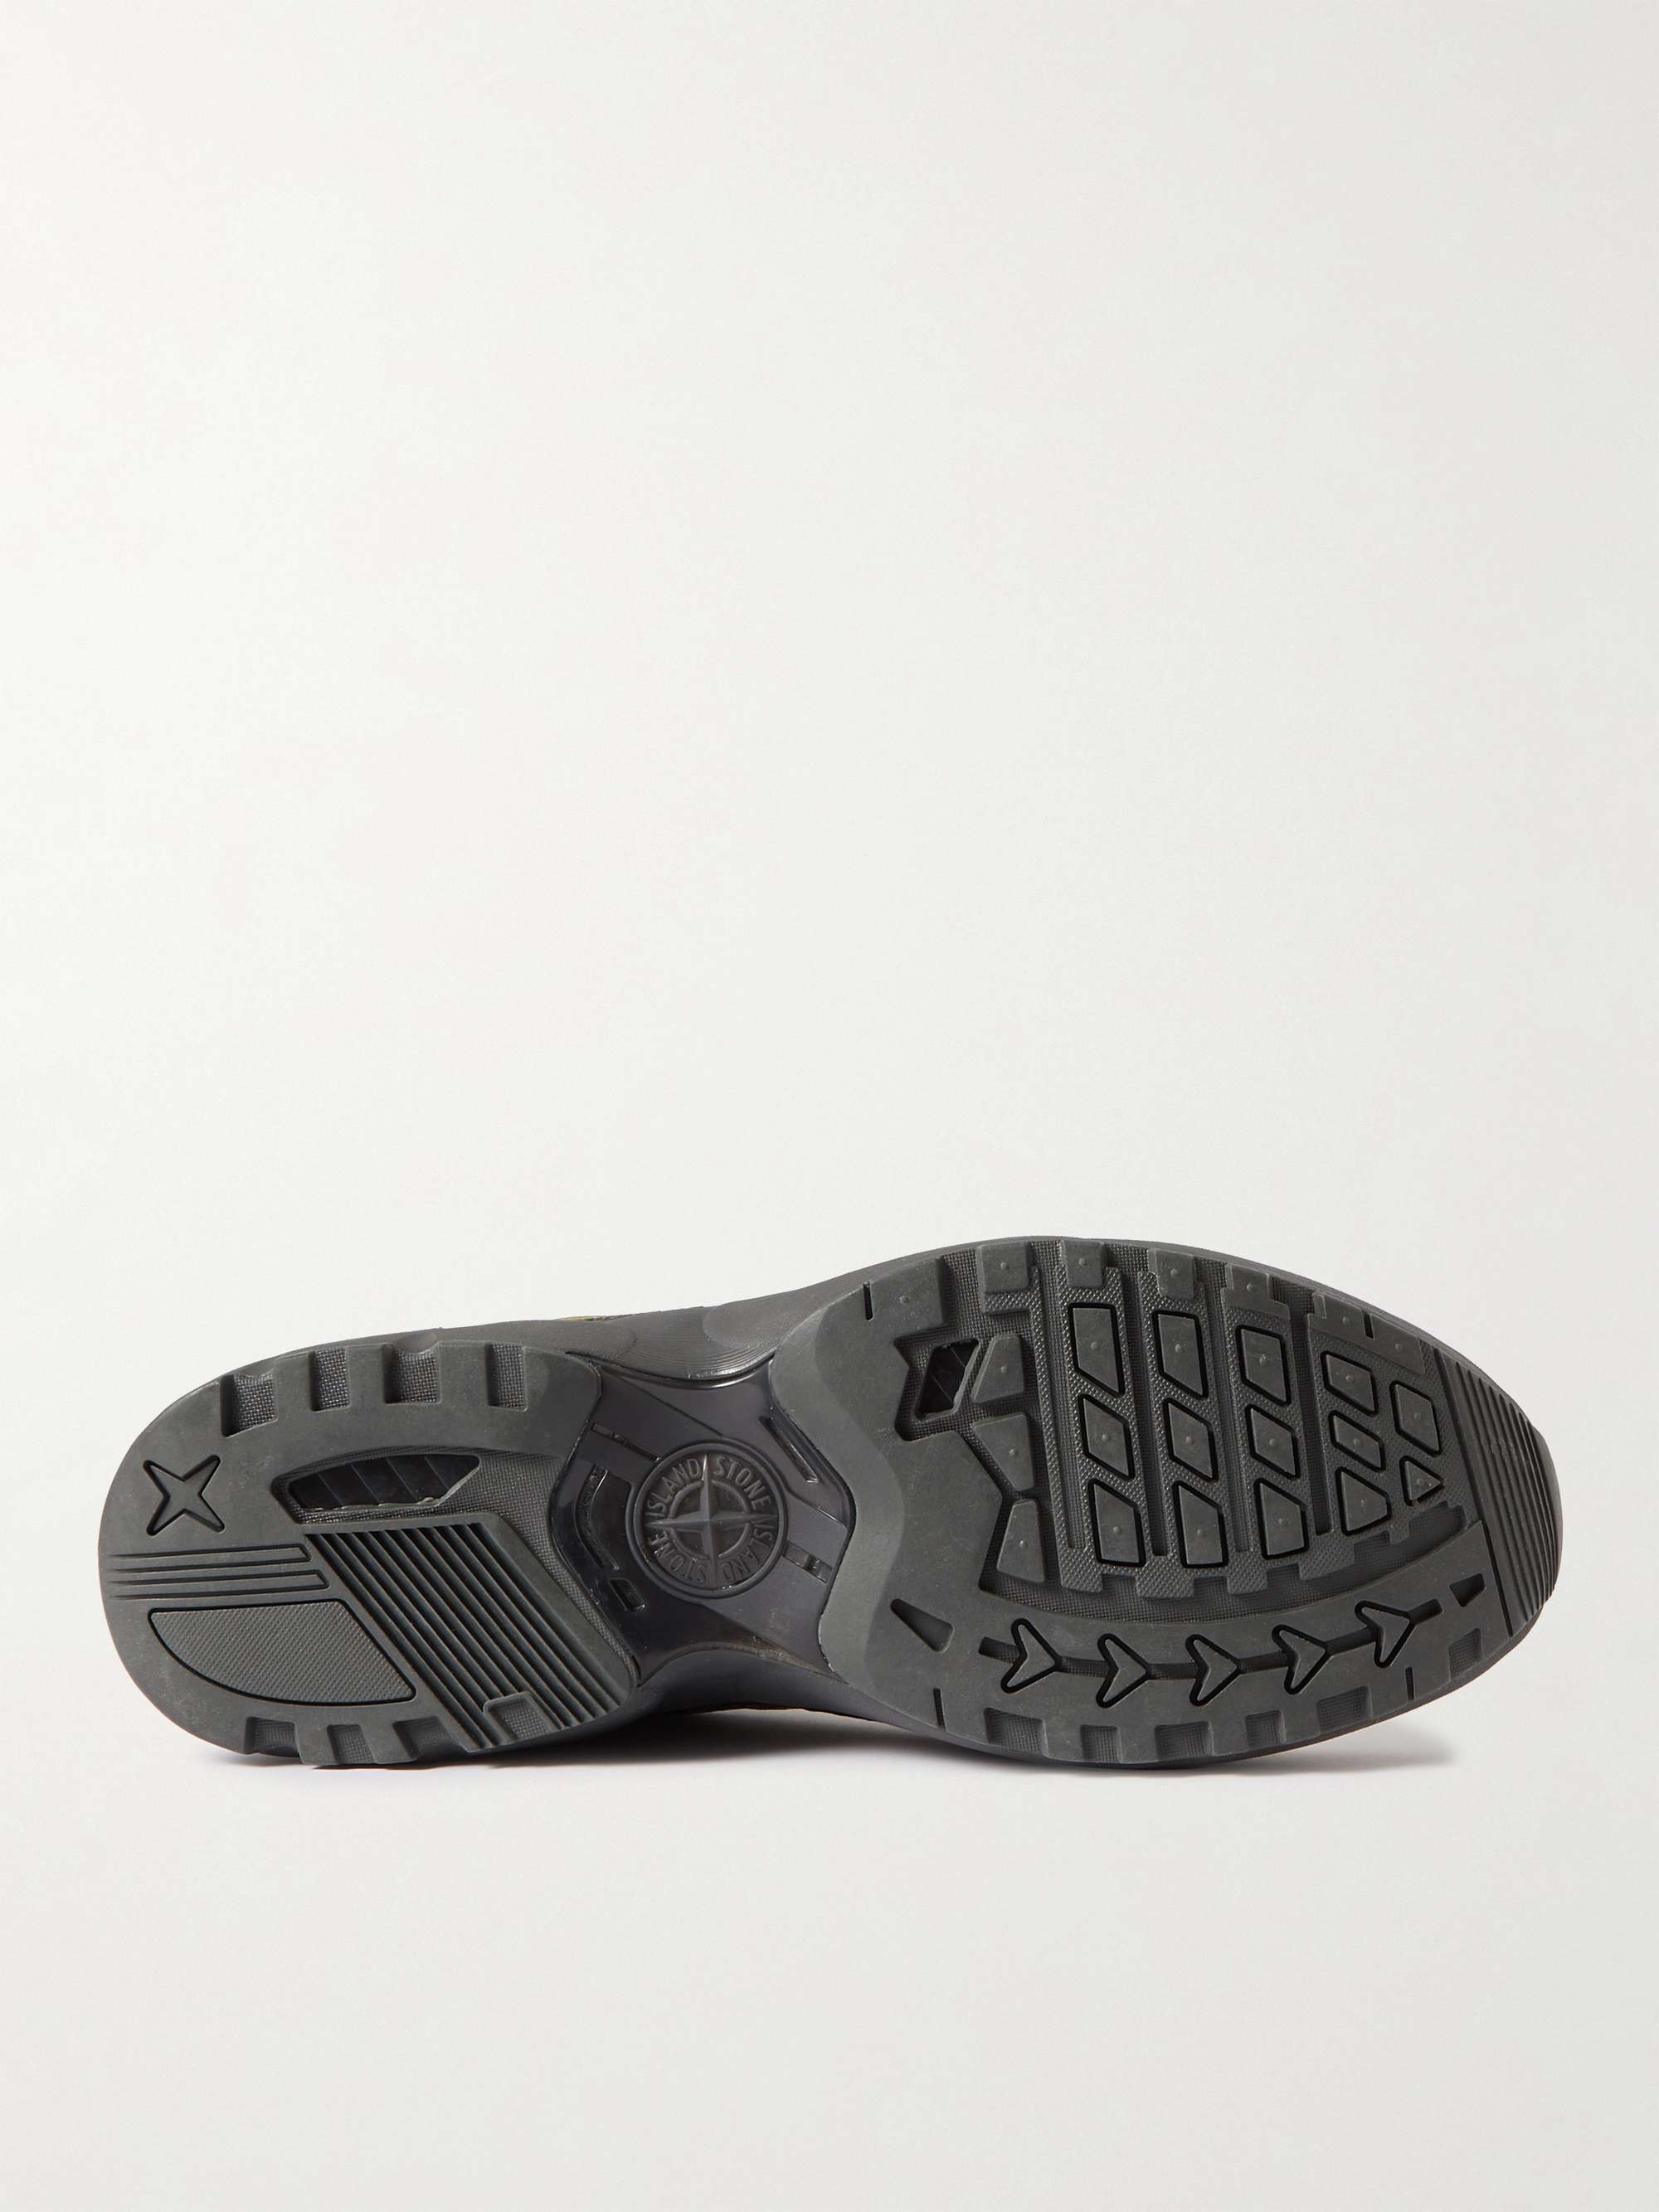 STONE ISLAND Grime Rubber-Trimmed Printed Mesh Sneakers